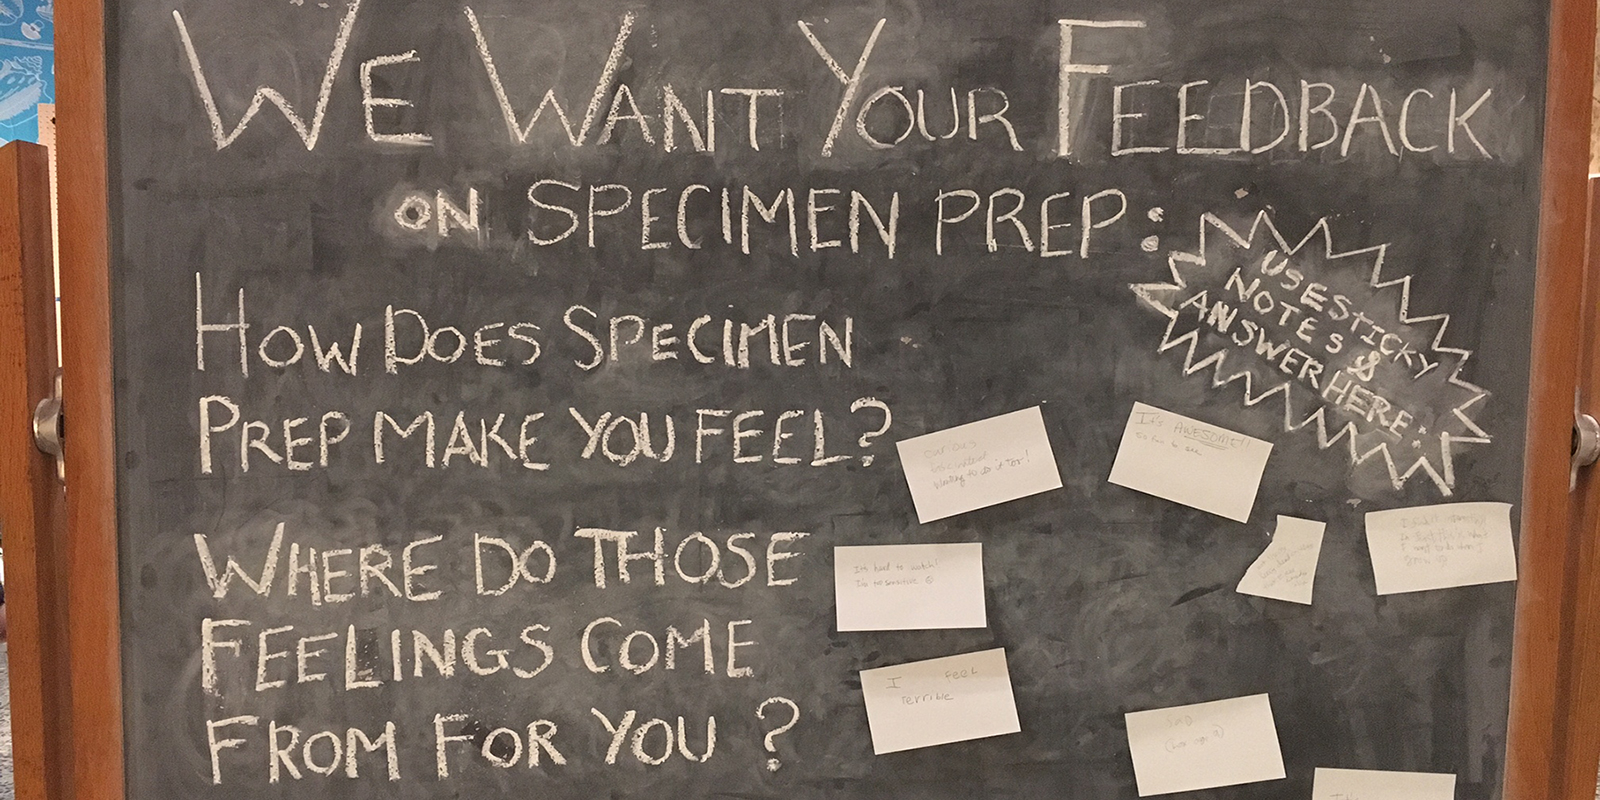 A blackboard with the words "We want your feedback on specimen prep: How does specimen prep make you feel? Where do those feeling come from for you?" then "Use sticky notes and answer here."We installed a board to directly ask for visitor feedback.